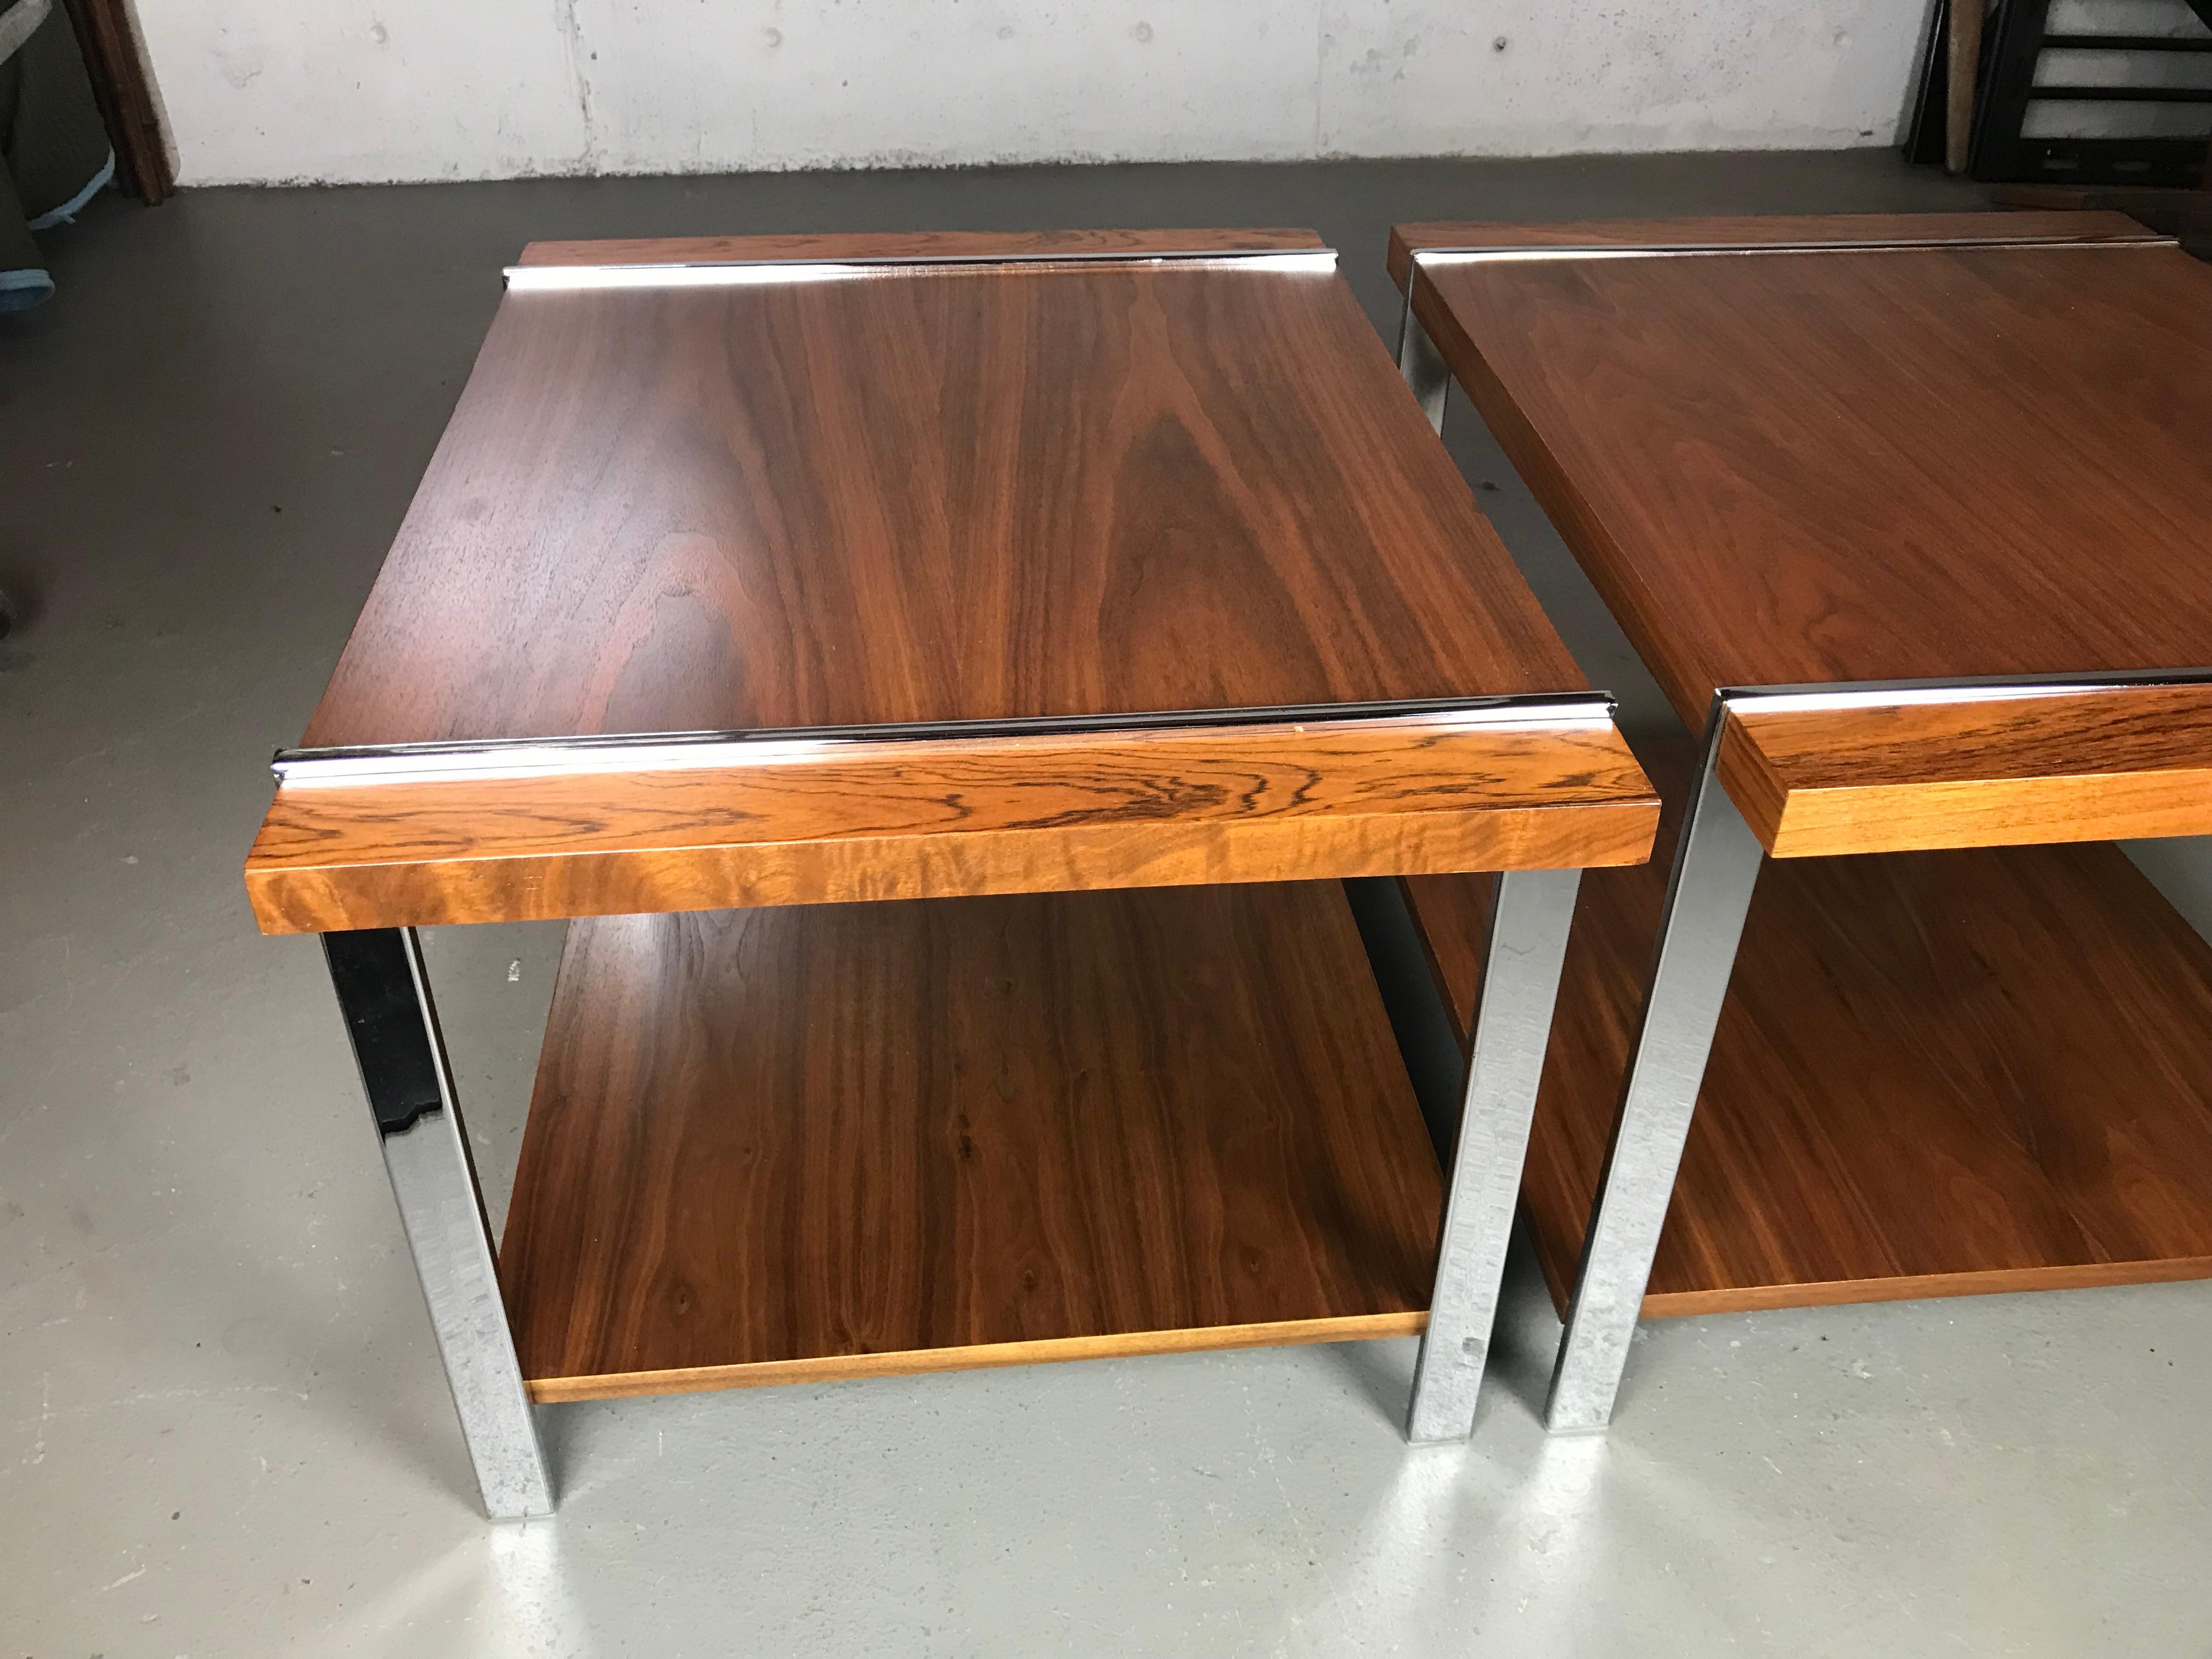 Very nice pair of Mid-Century Modern end tables by Milo Baughman for Lane. Made of rosewood, walnut & chrome. The tables have been refinished. Very light signs of use on the chrome. Nice chrome frames that show the wood planks jutting through.